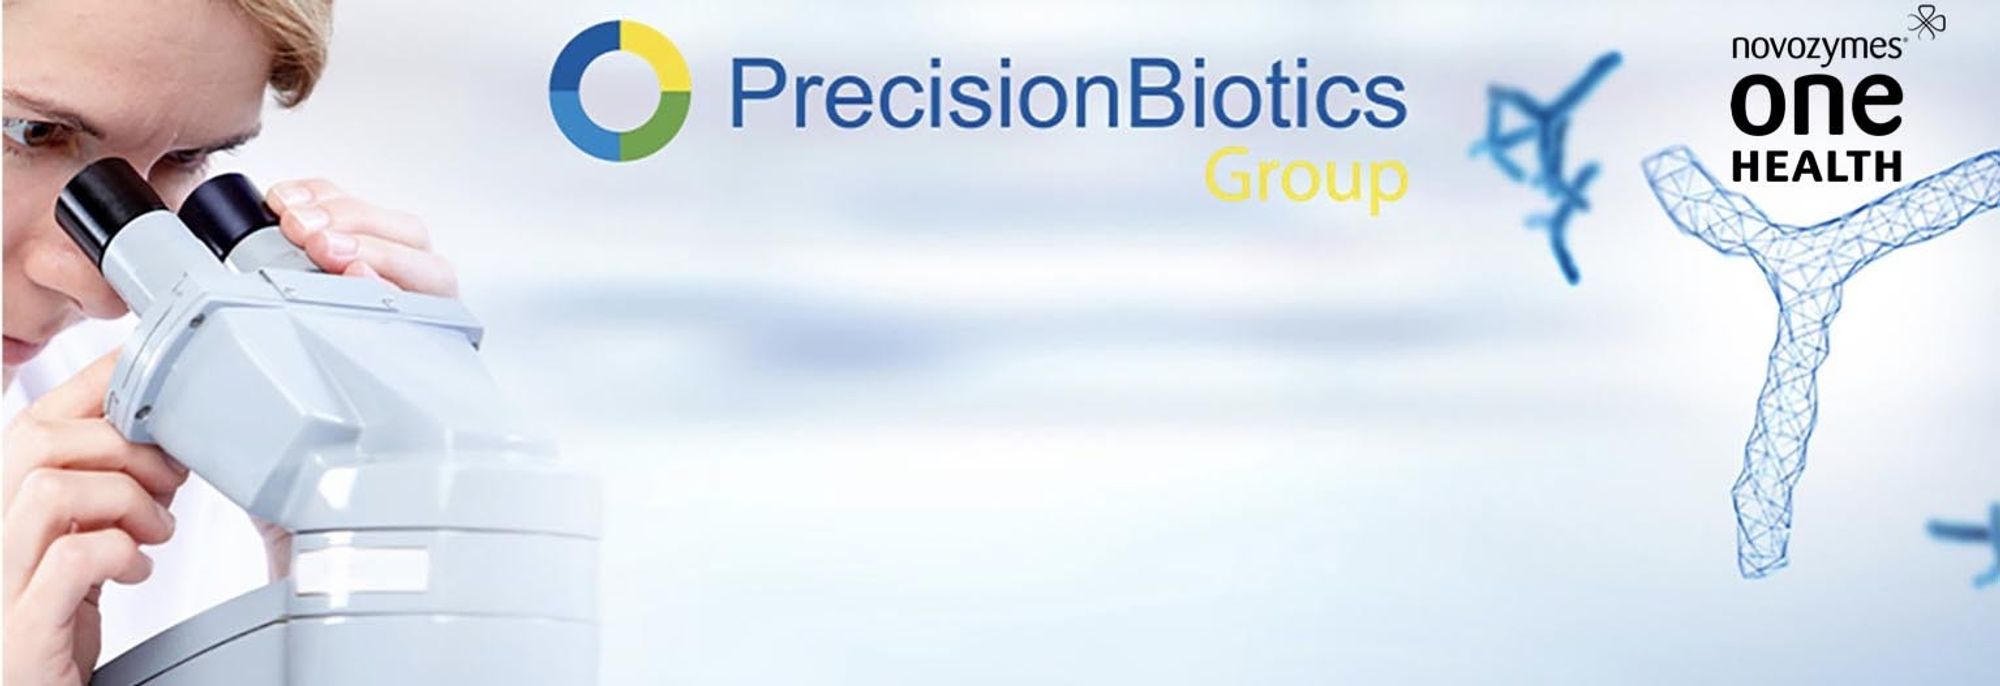 Figure 1: An image taken from the old PrecisionBiotics website. On the left is a young, blonde-haired man looking into a microscope. At the centre of the image is the old PrecisionBiotics logo. On the right side is the Novozymes One Health logo. In the background there are bacteria molecular structures.